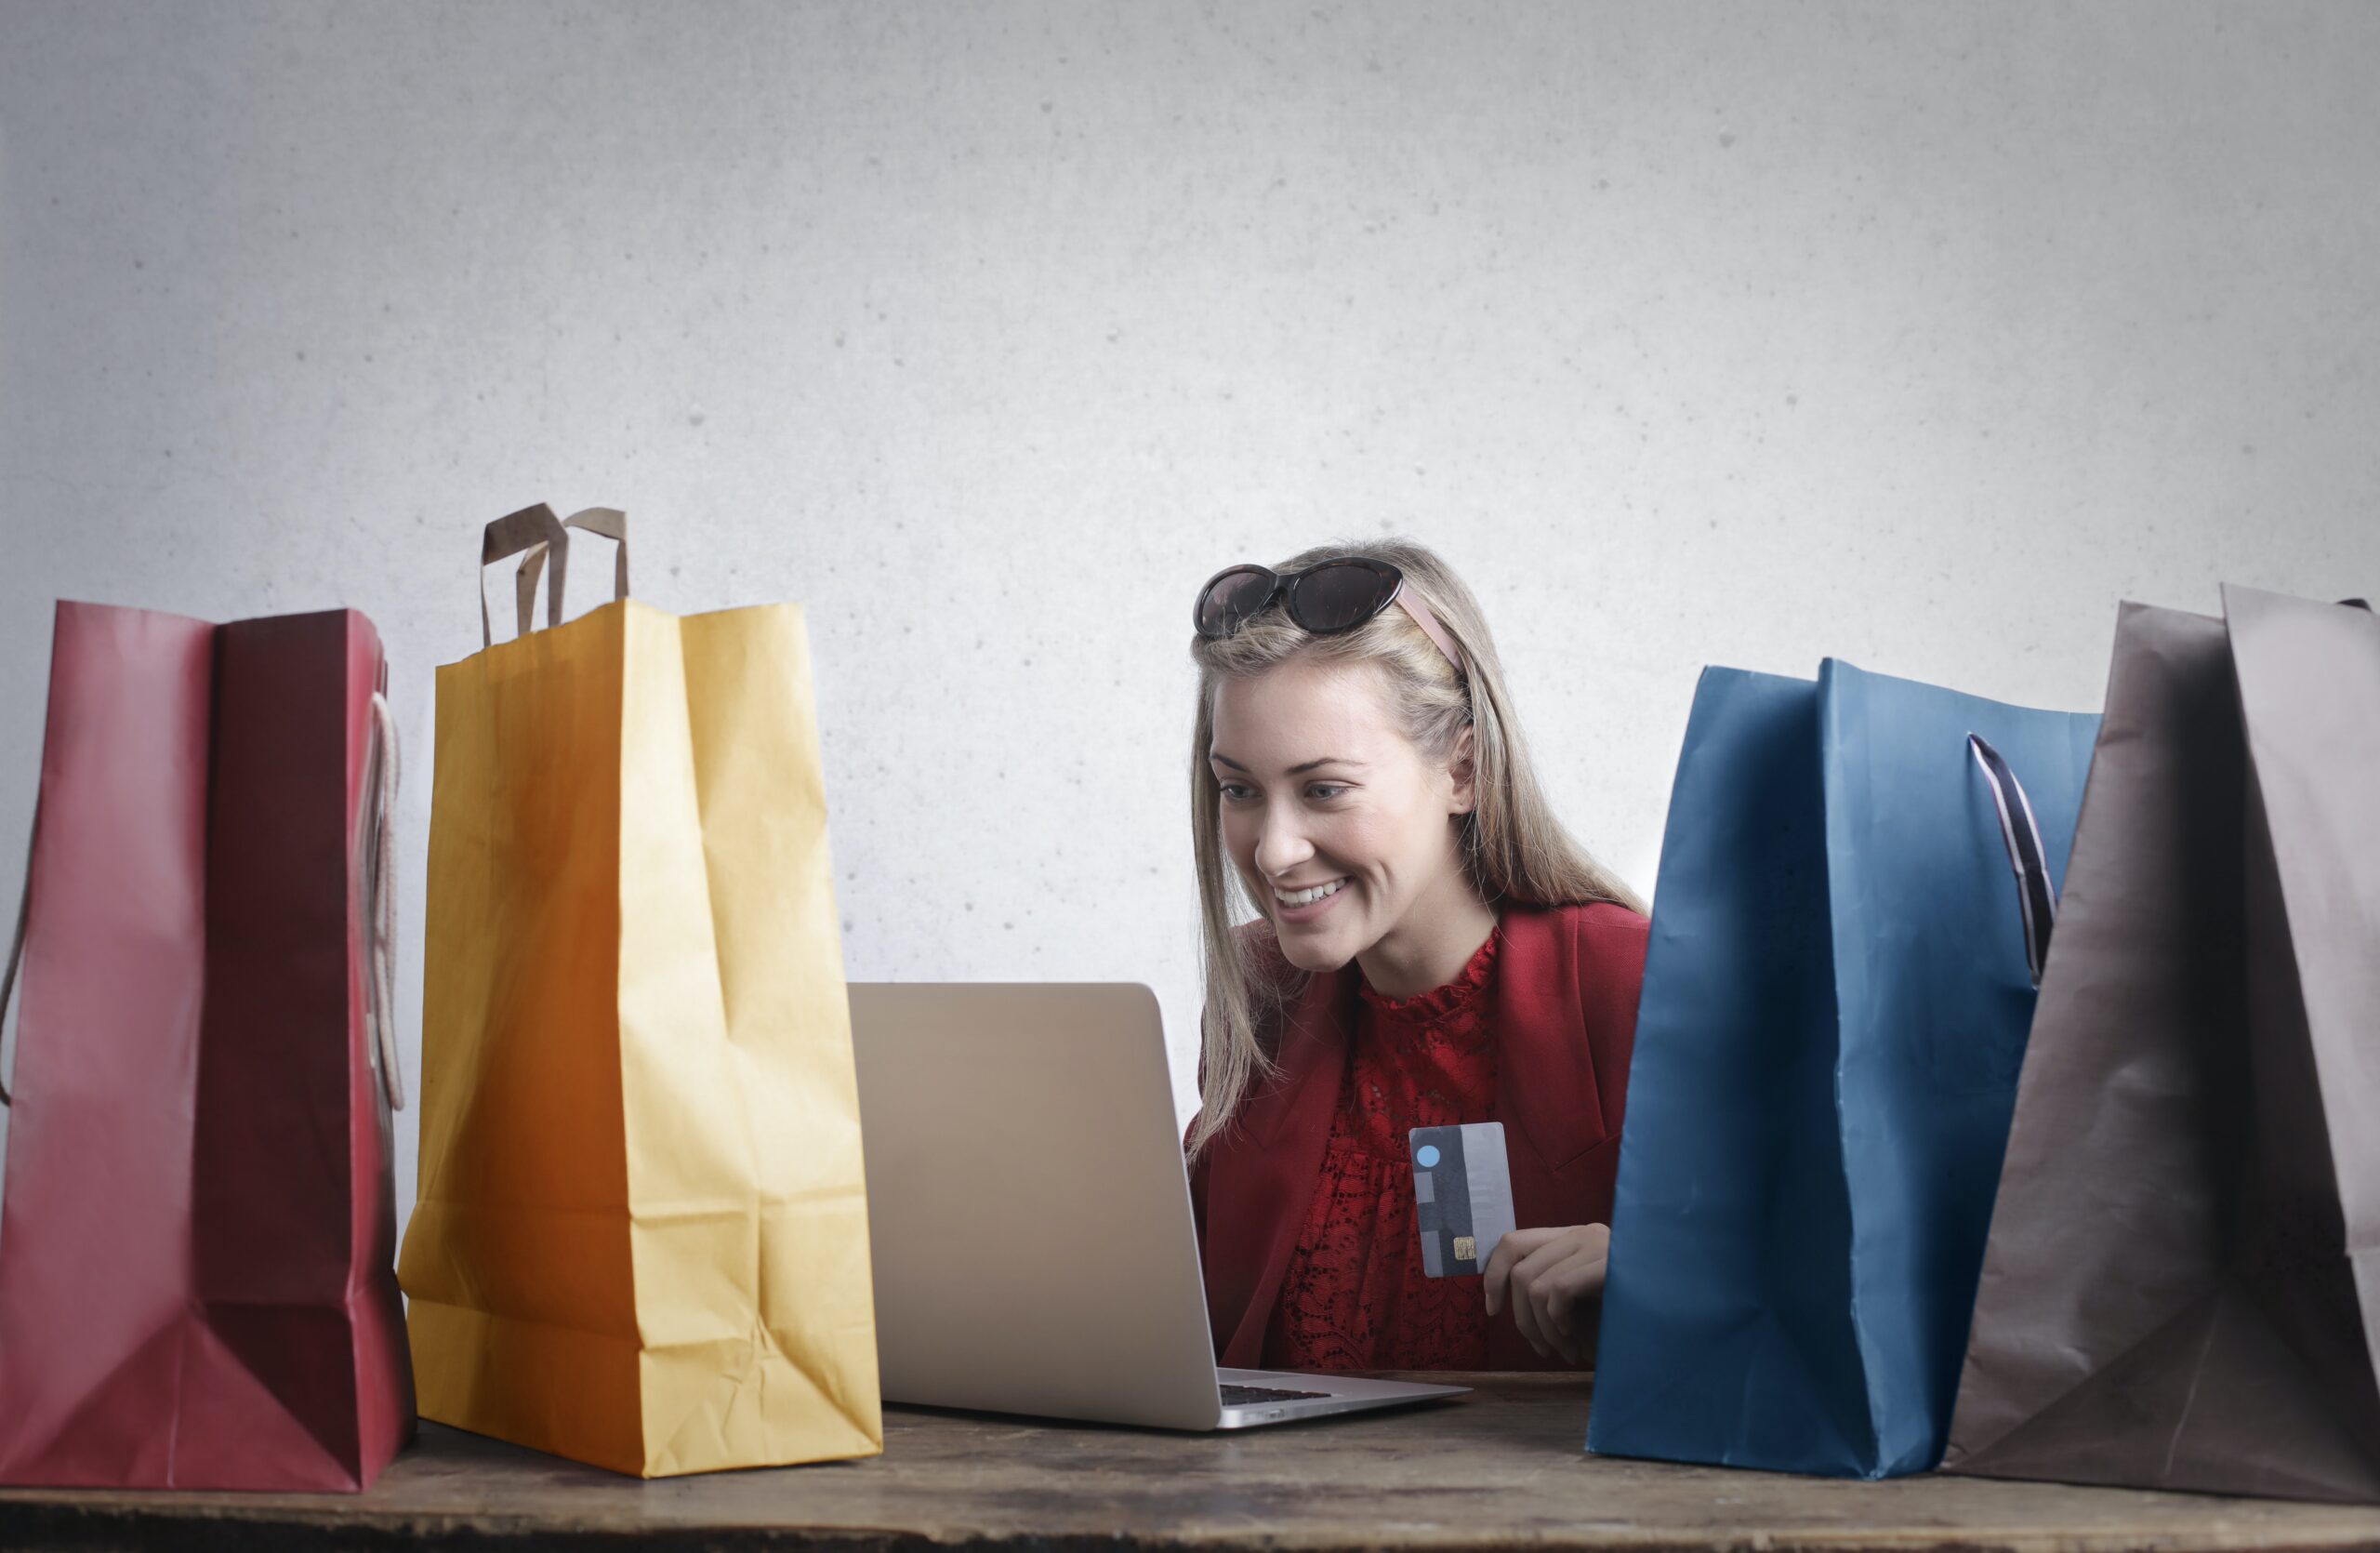 Woman surrounded by shopping bags buying something on laptop